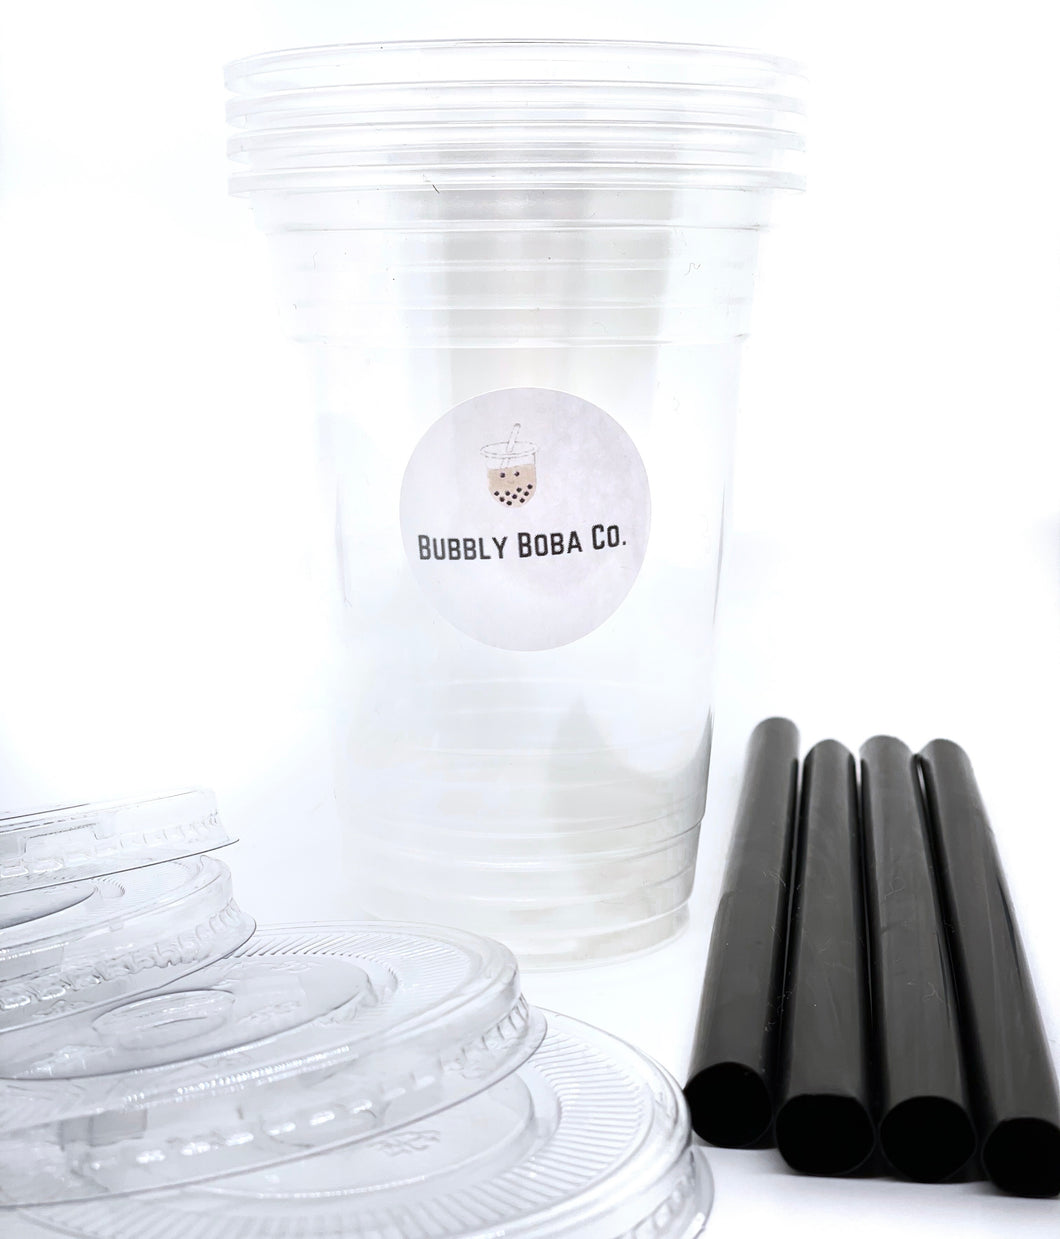 Bubbly Boba Cups, Lids, and Boba Straws